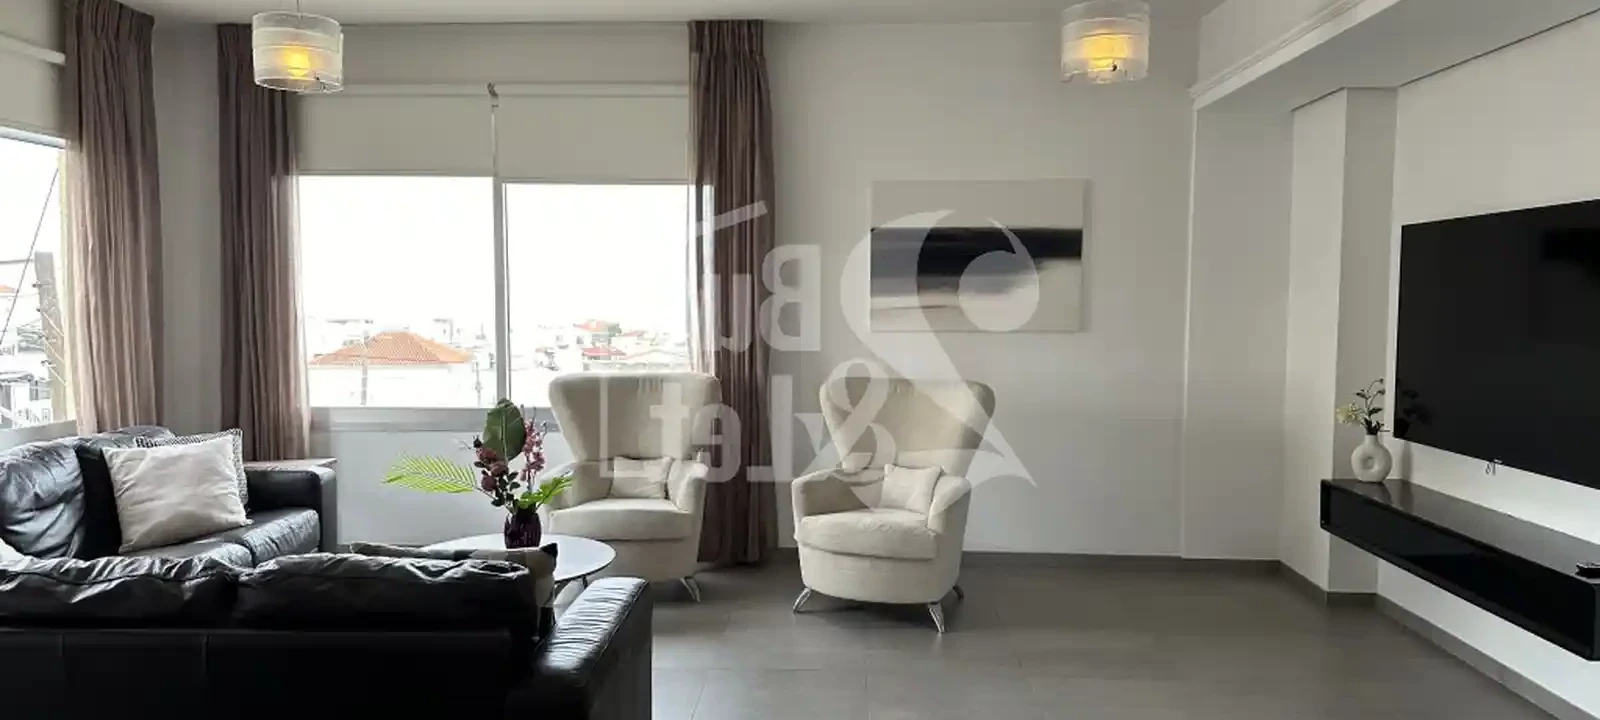 3-bedroom apartment to rent €1.950, image 1